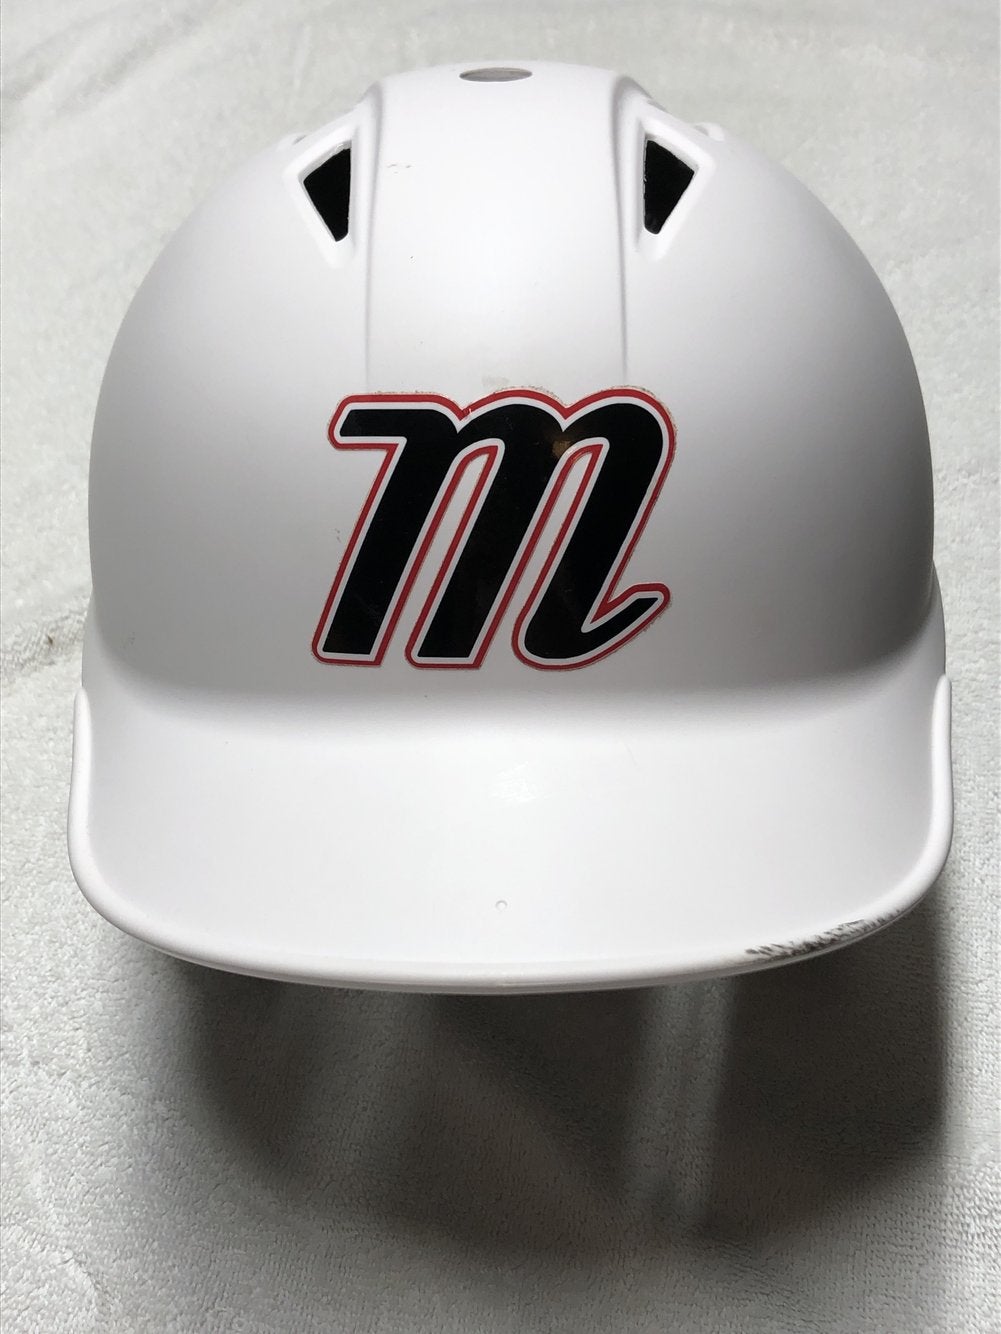 Marucci Baseball Batting Helmets for sale | New and Used on 